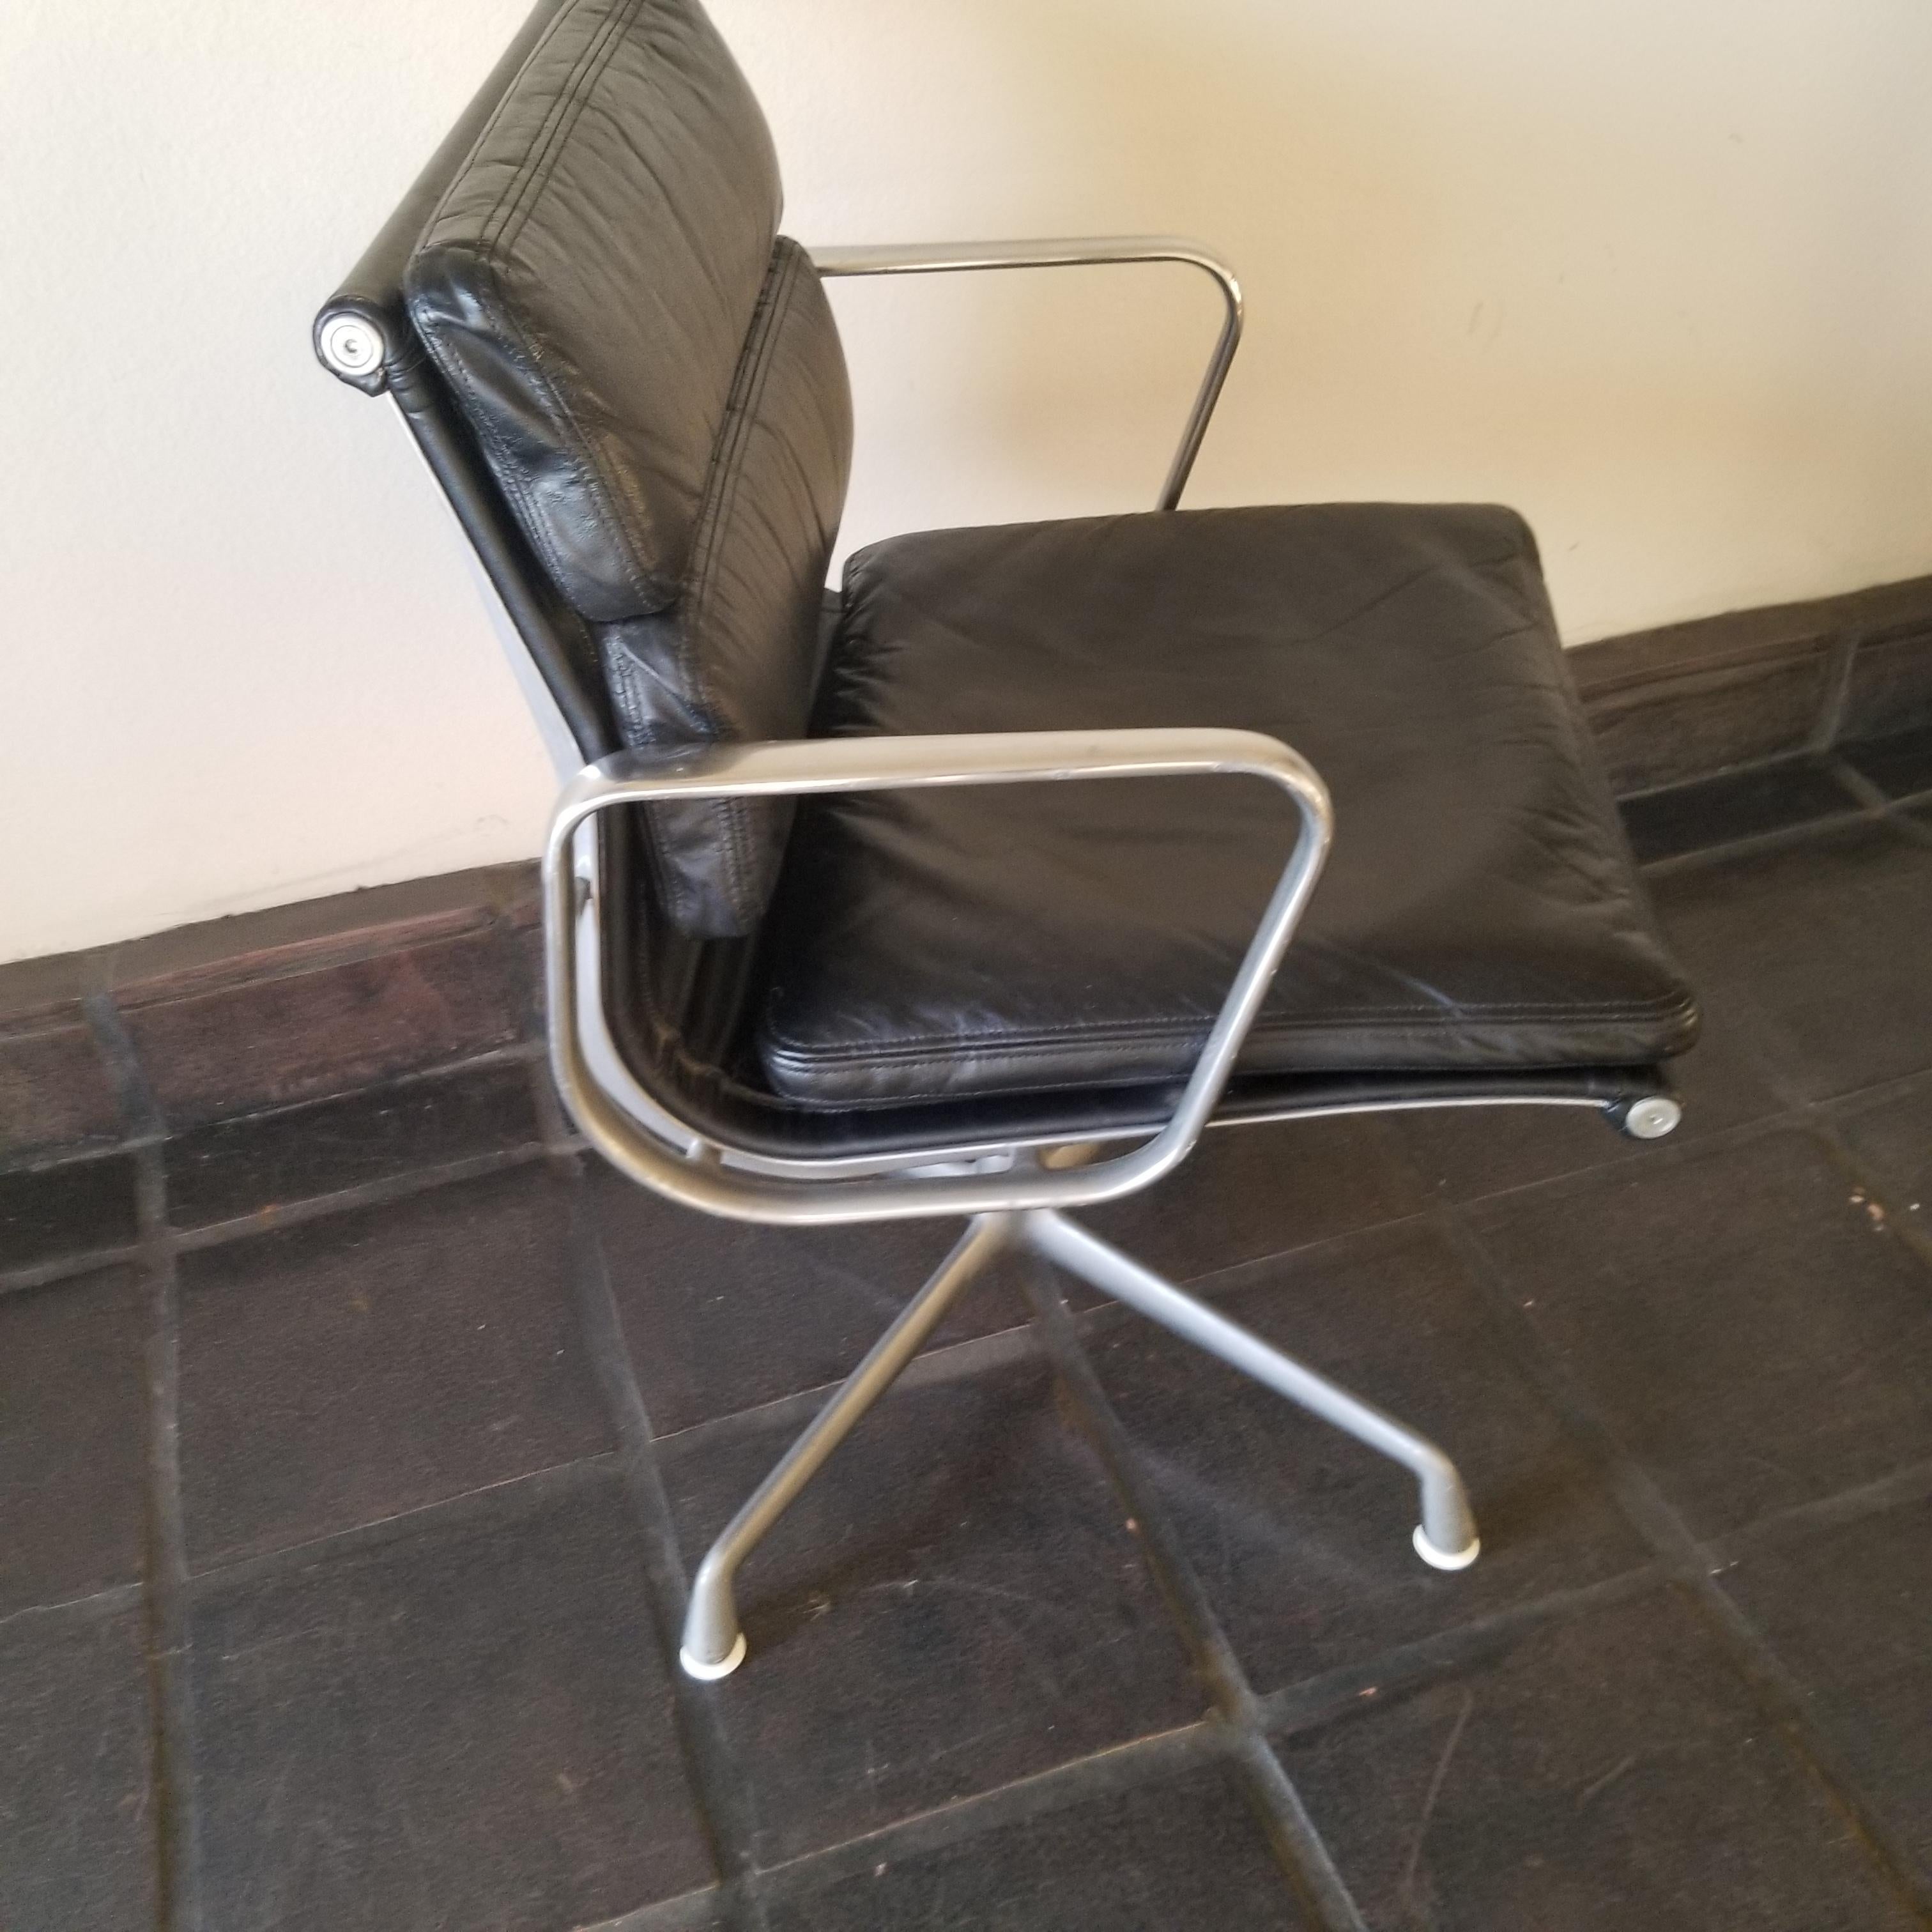 Classic vintage original Herman Miller Eames soft pad management side office chair black leather in vintage condition
Eames Classic design soft pad chair in black leather by Charles and Ray Eames designed 1969
Called the Soft Pad for the aluminum